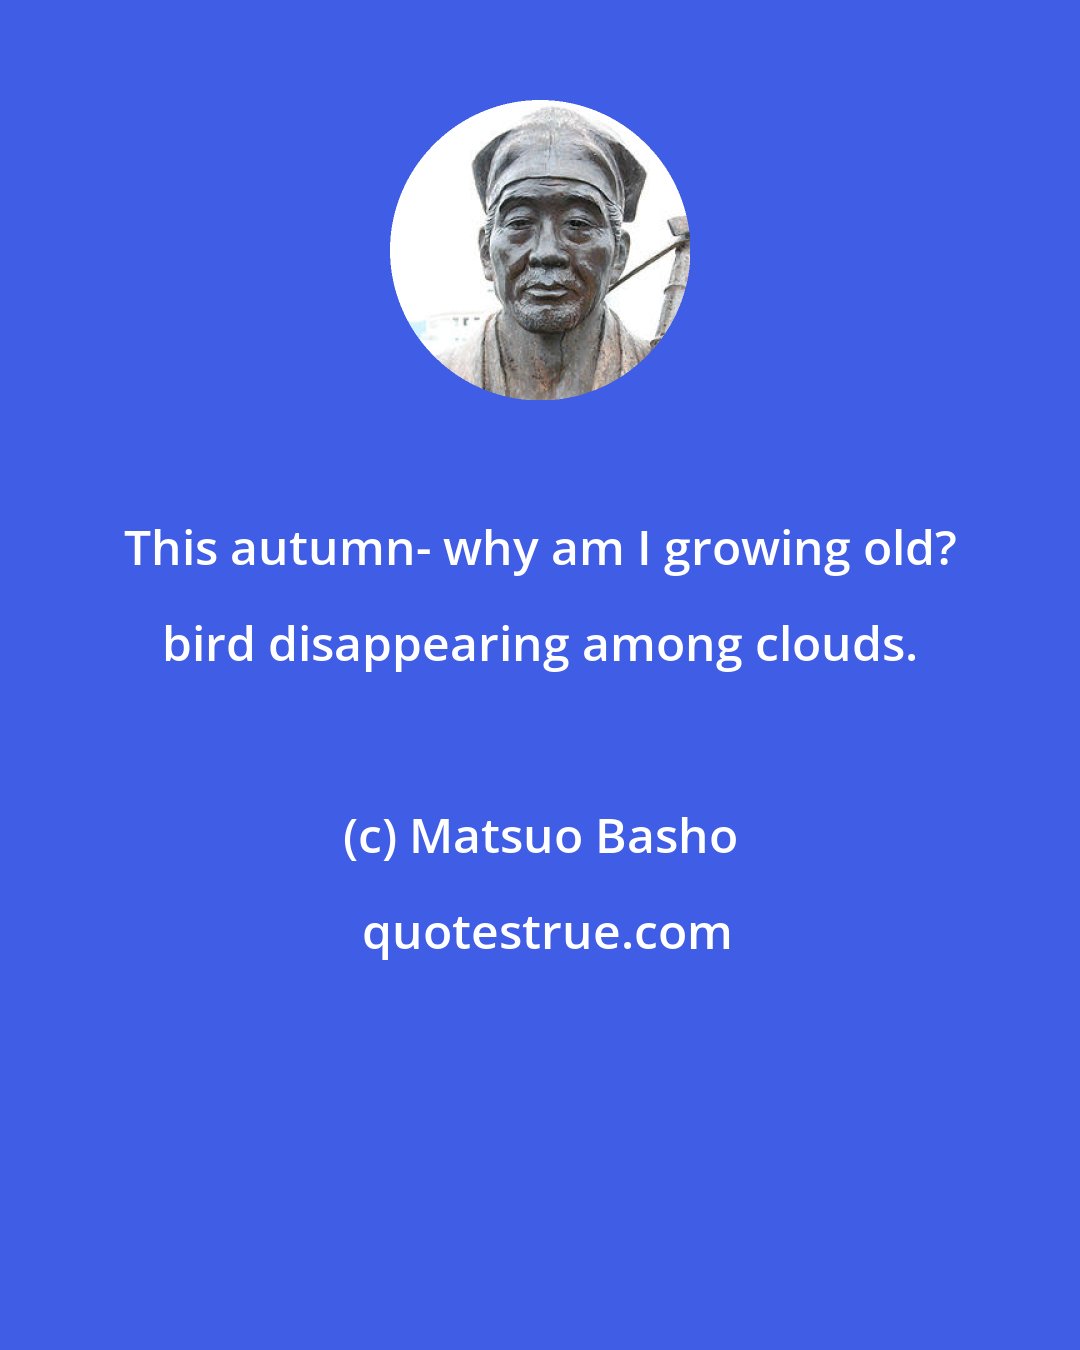 Matsuo Basho: This autumn- why am I growing old? bird disappearing among clouds.